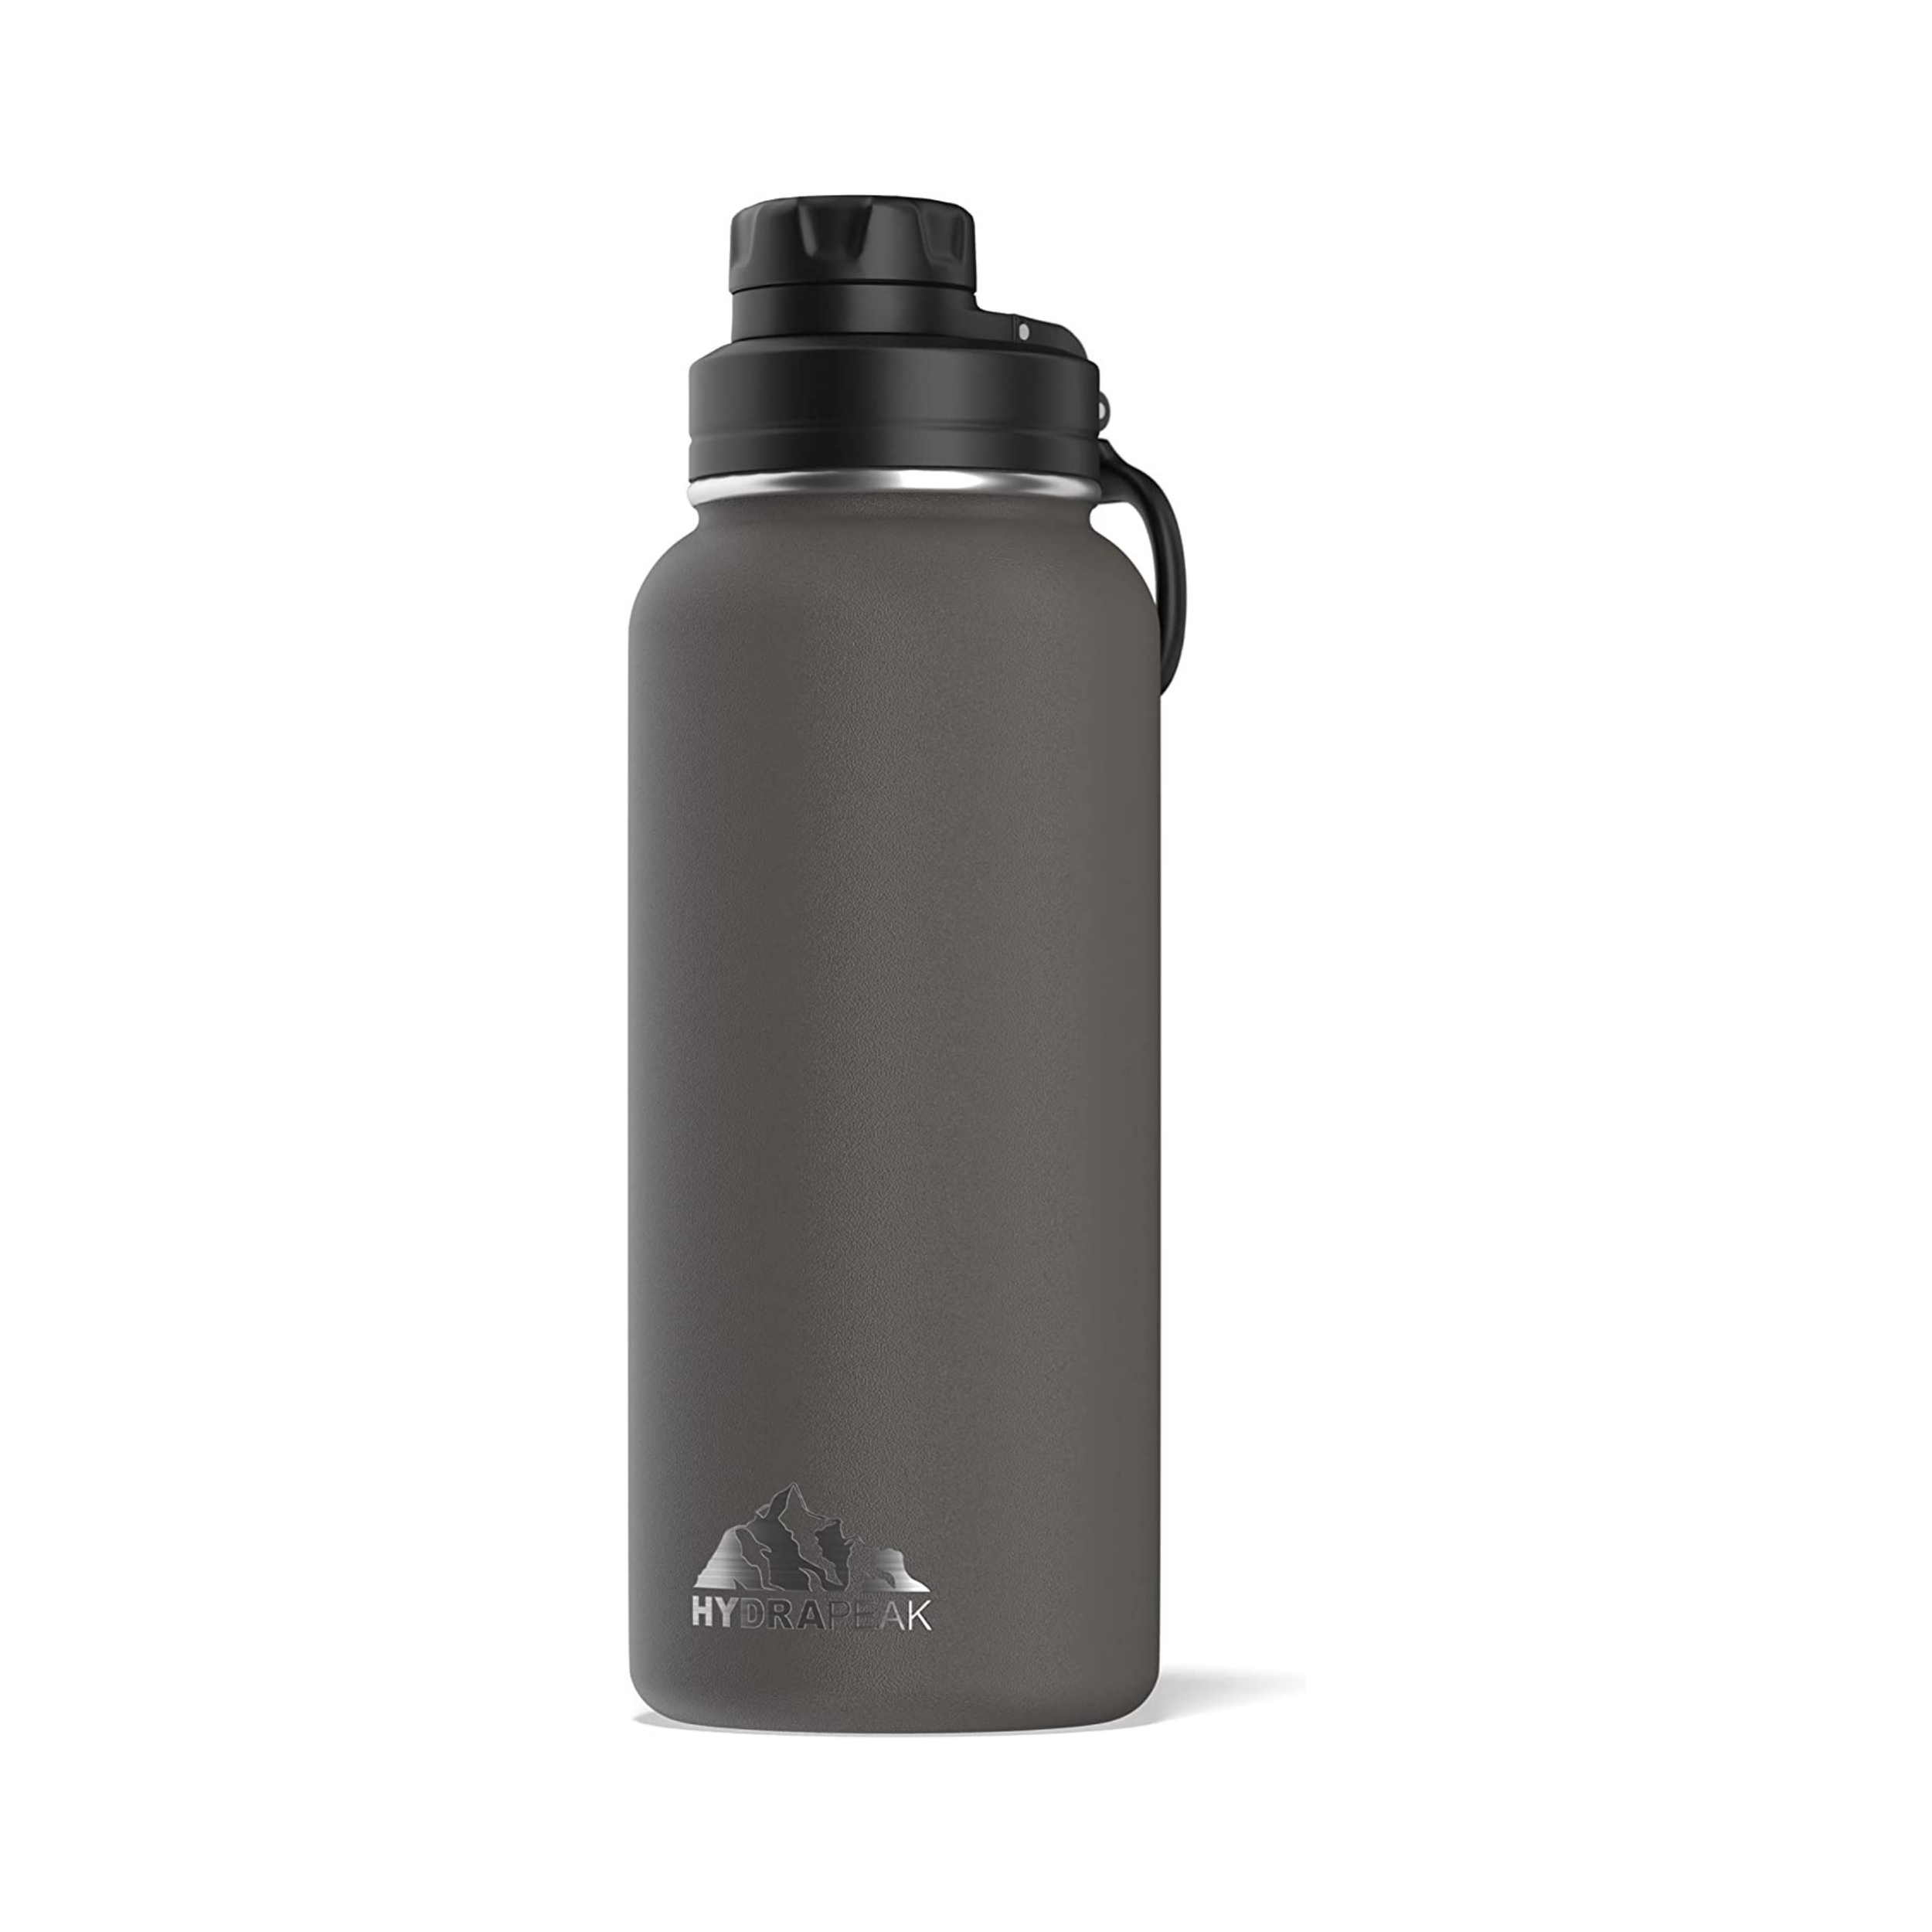 https://watertrackers.com/wp-content/uploads/2021/11/Insulated-Stainless-Steel-Water-Bottle-2.png